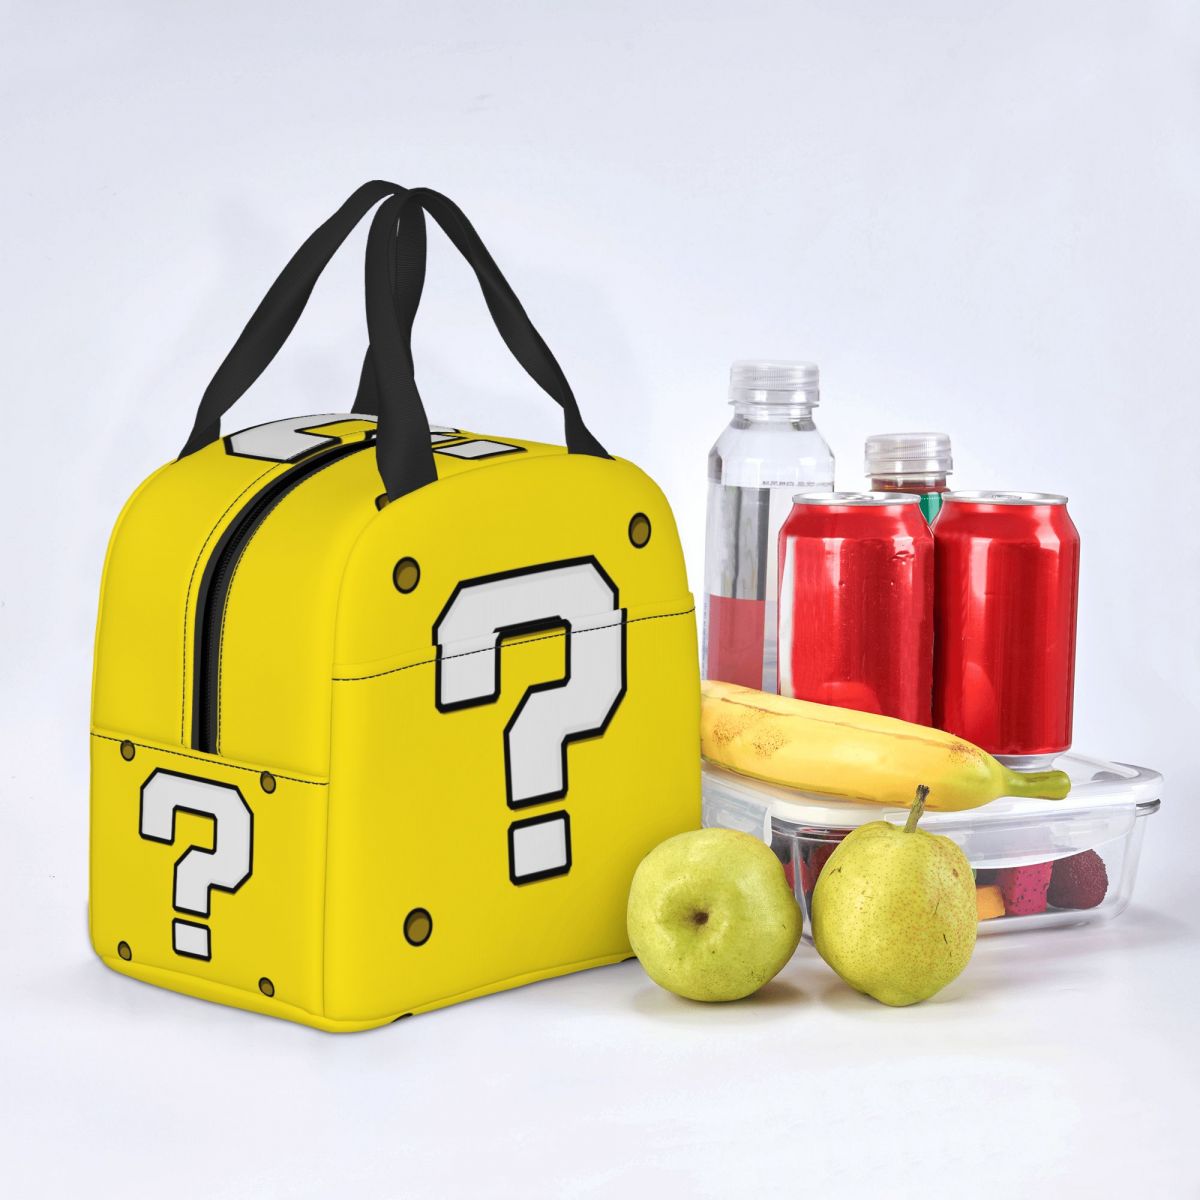 https://appleverse.us/wp-content/uploads/2023/05/Question-Block-Marios-Insulated-Lunch-Bag-for-Women-Men-Leakproof-Hot-Cold-Lunch-Box-Kids-School-5.jpg